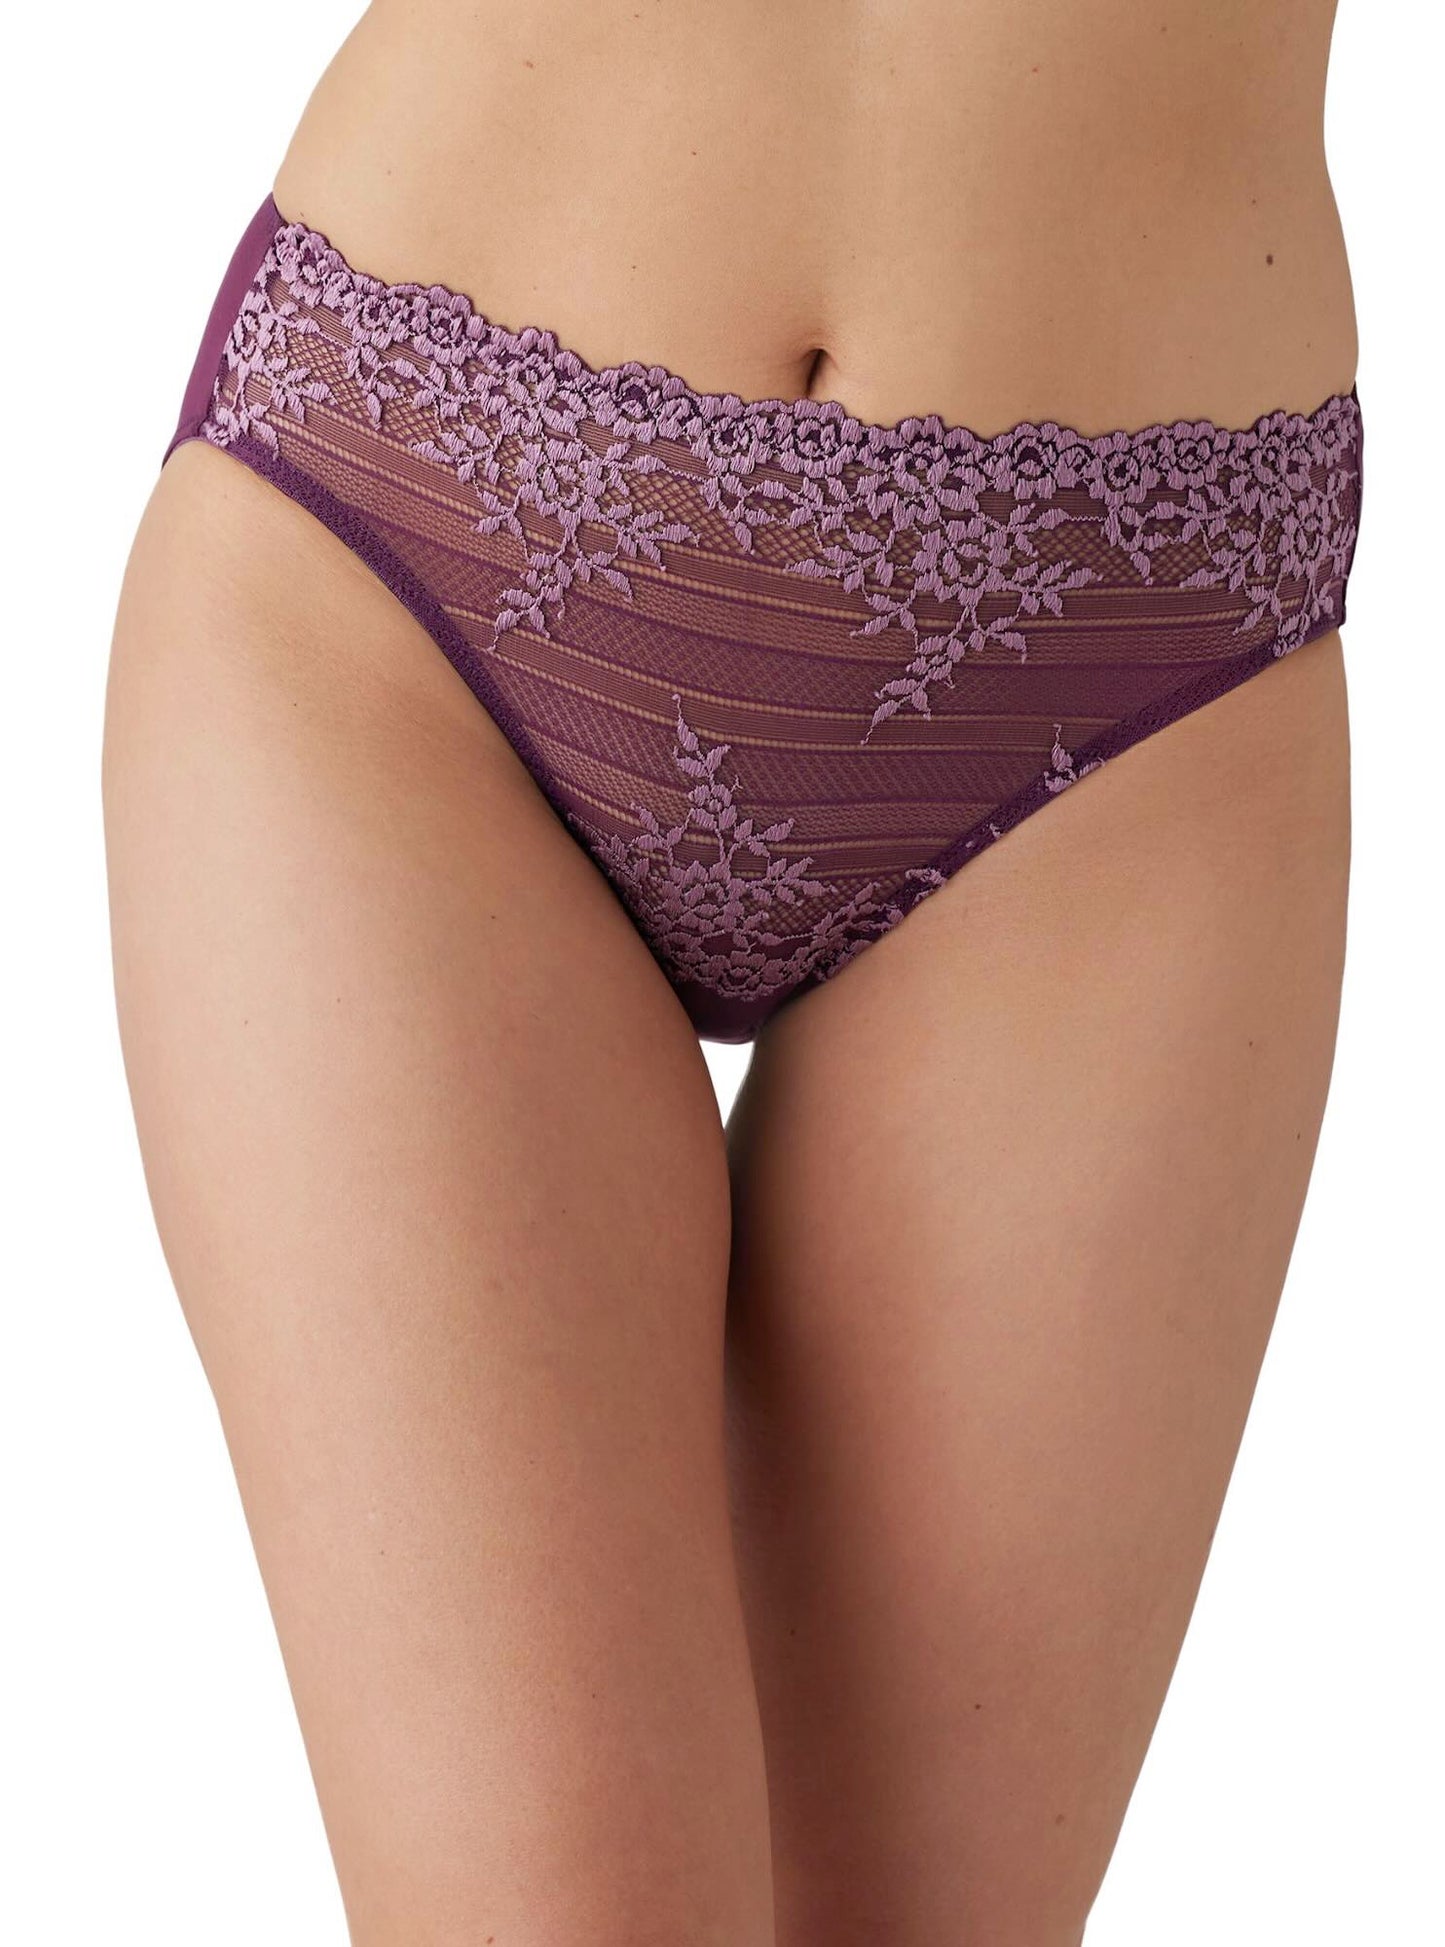 Embrace Lace high cut brief - fall color